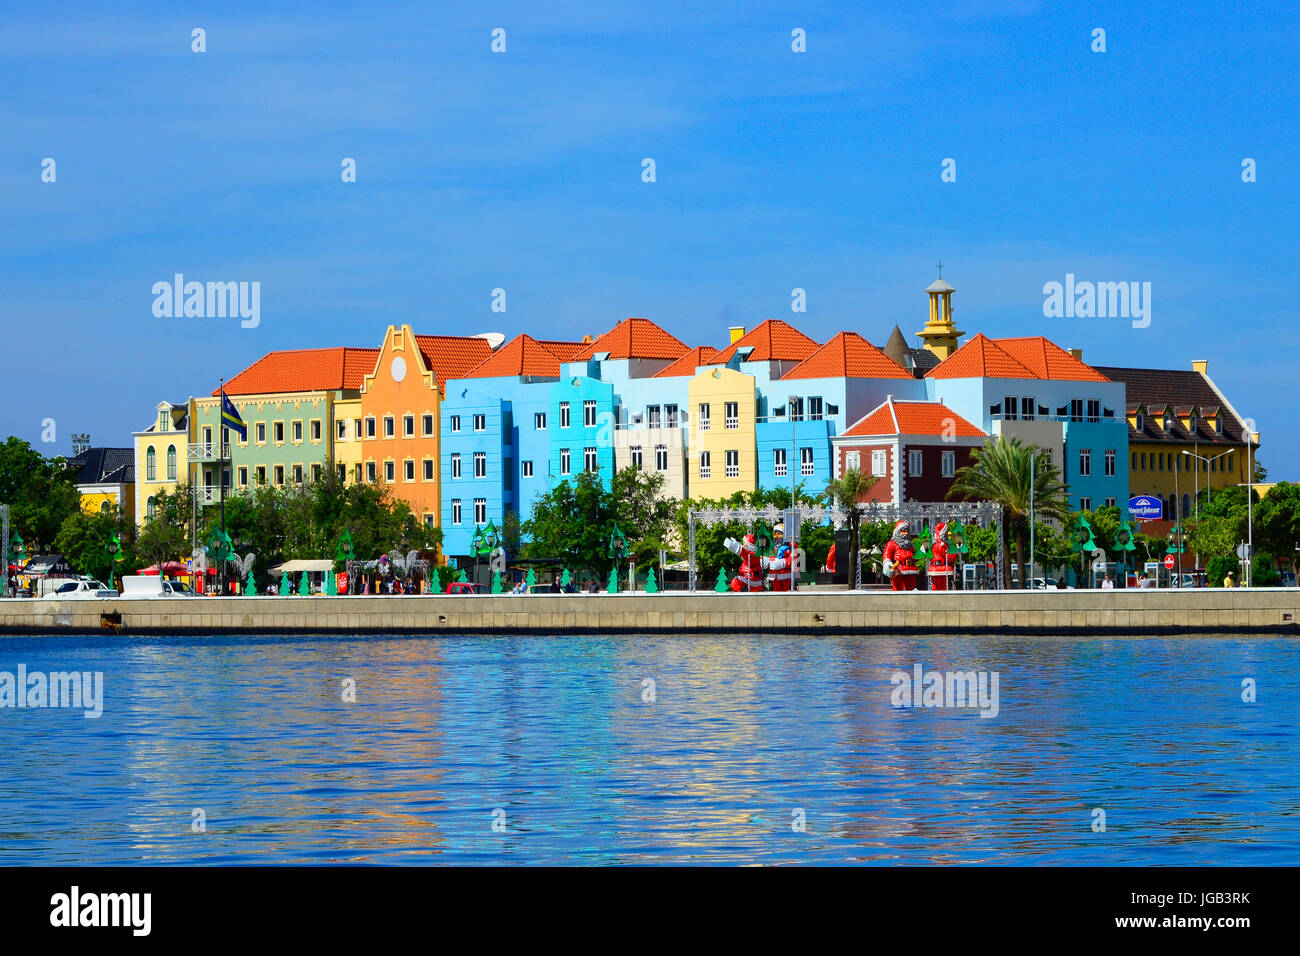 Willemstad Curacao Netherlands Antilles Southern Caribbean Island Cruise from Miami Florida Stock Photo